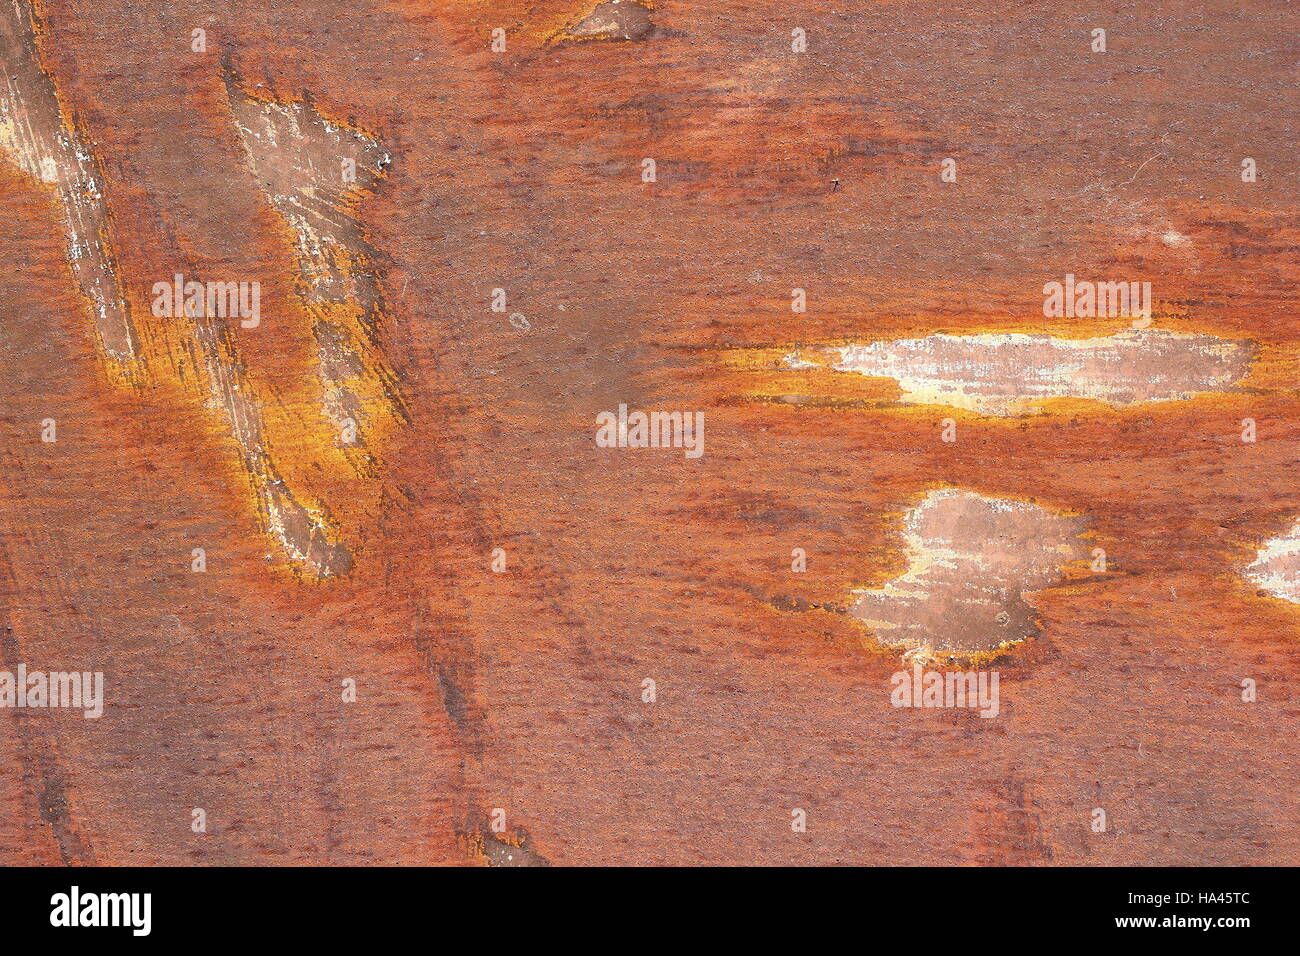 old orange rusted metal surface, real texture of damaged board Stock Photo